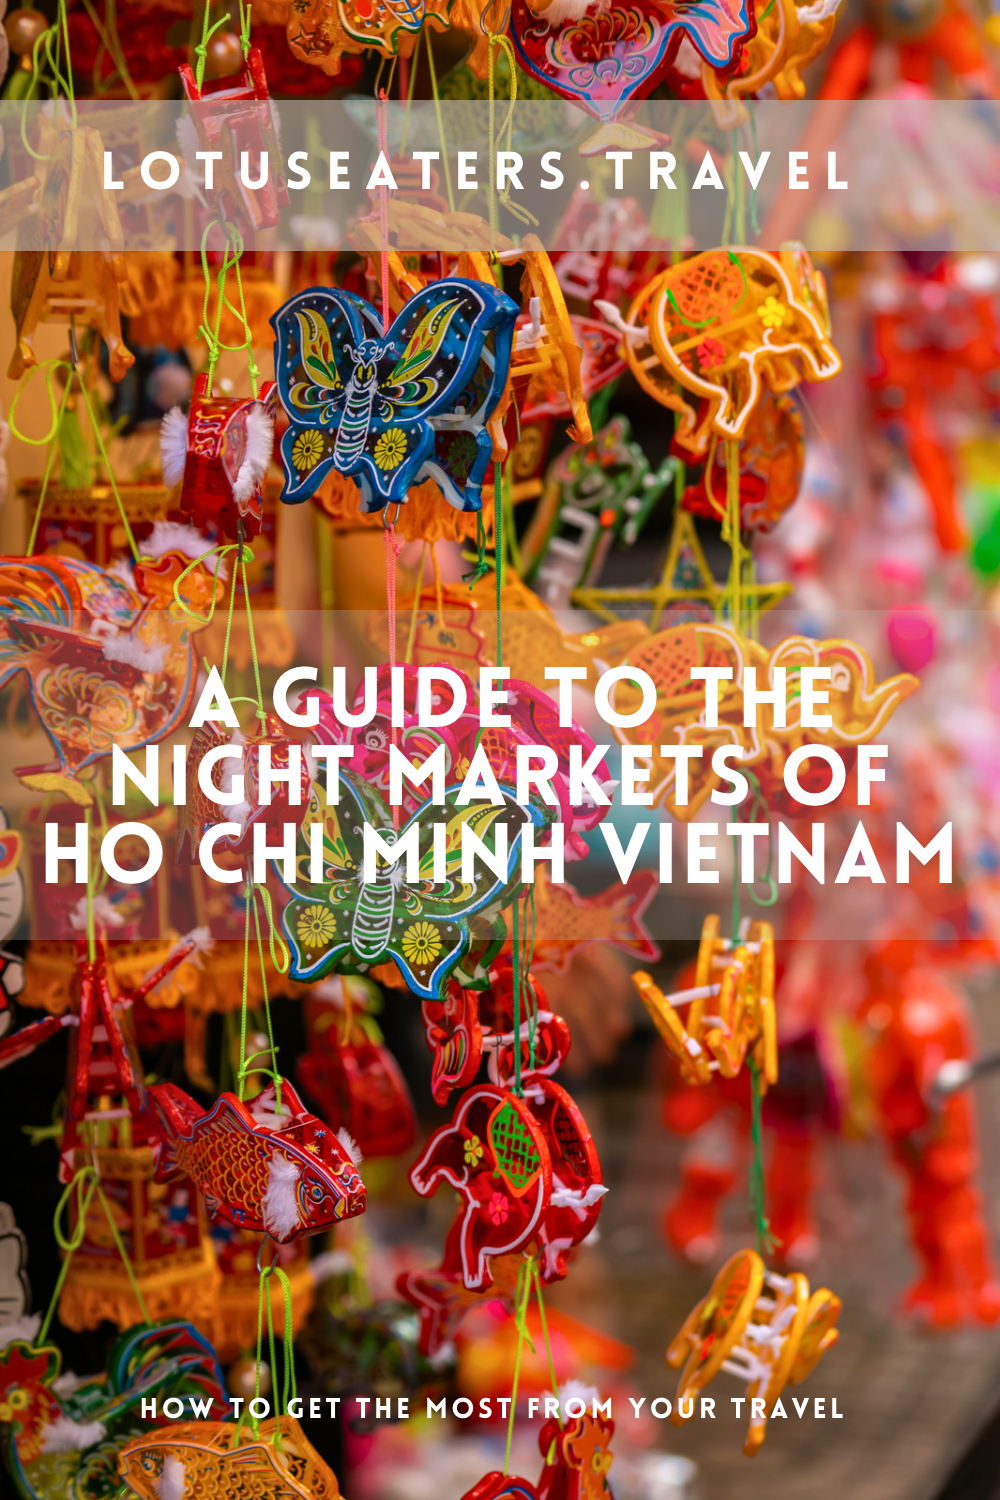 Guide to the Night Markets of Ho Chi Minh